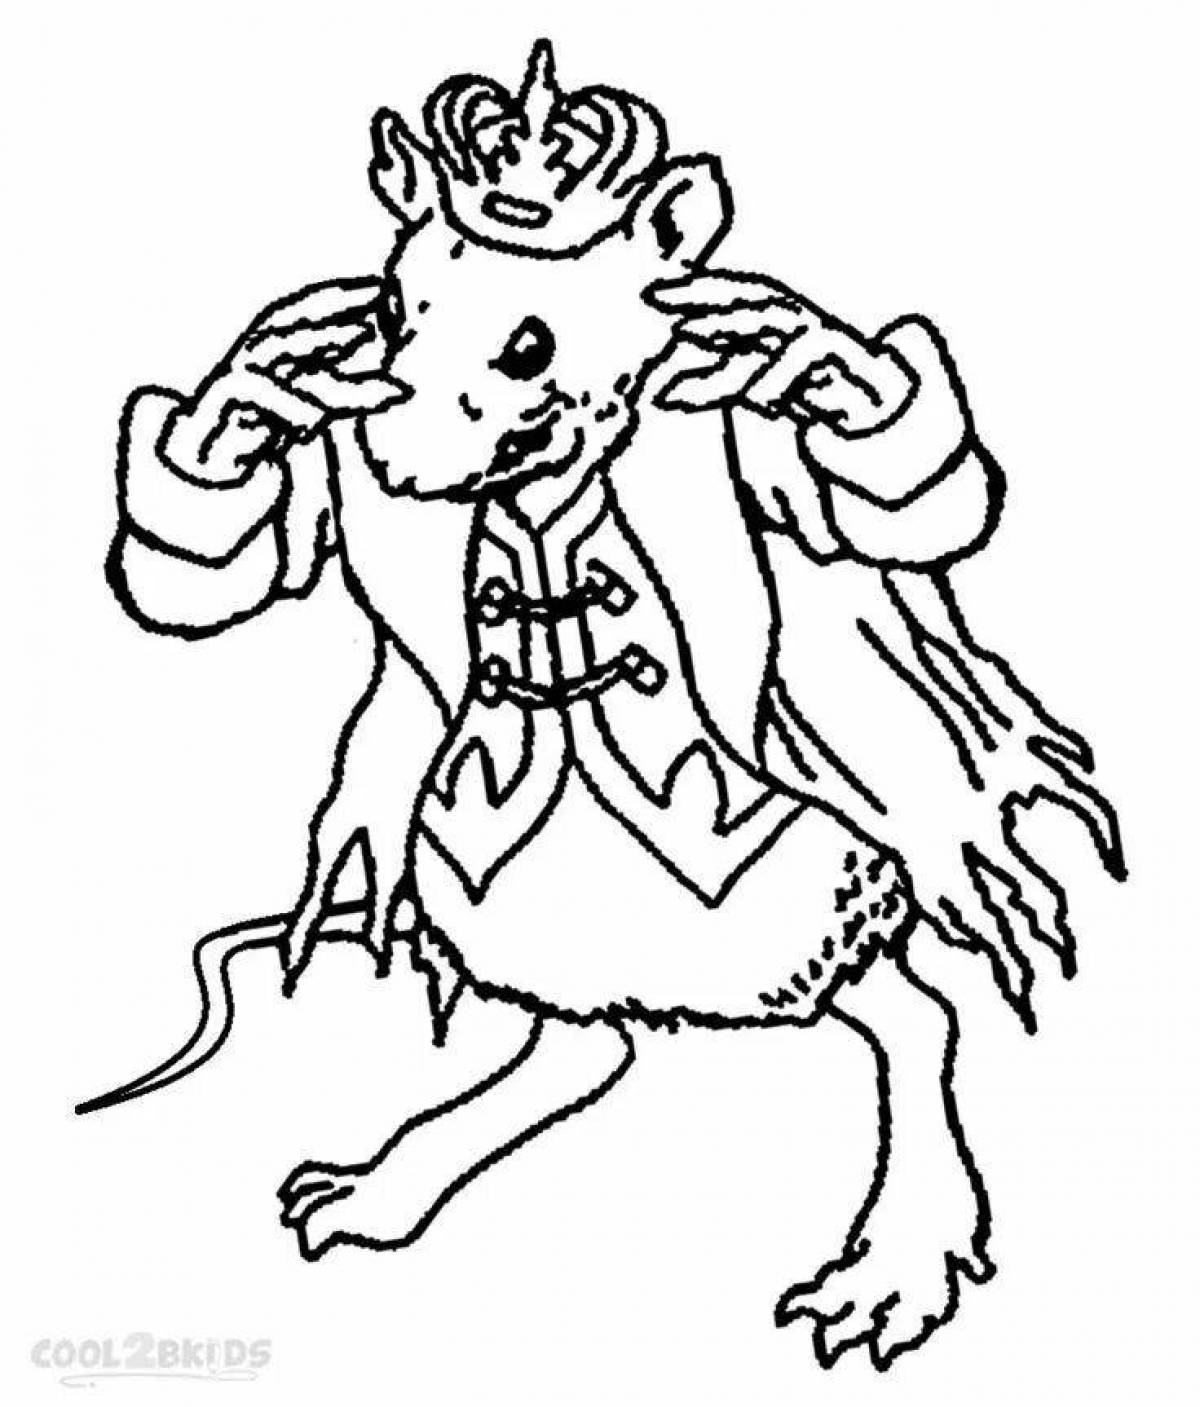 Innovative mouse king coloring page